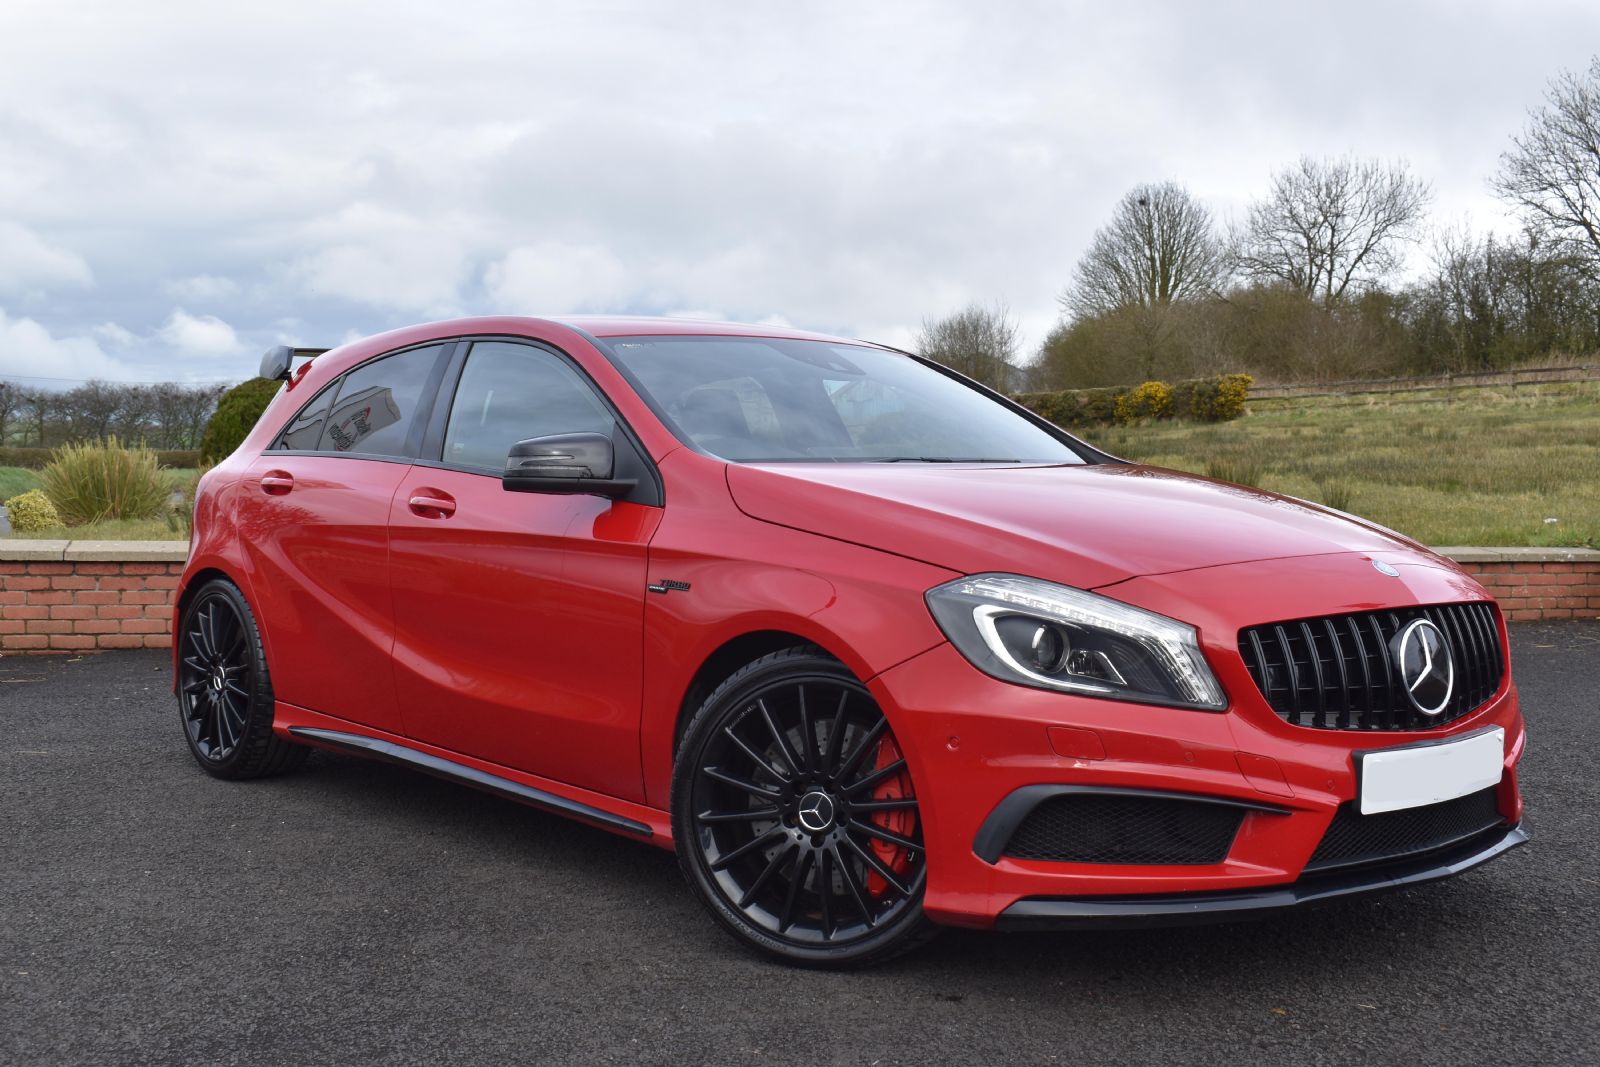 Used Mercedes-Benz A CLASS Northern Ireland